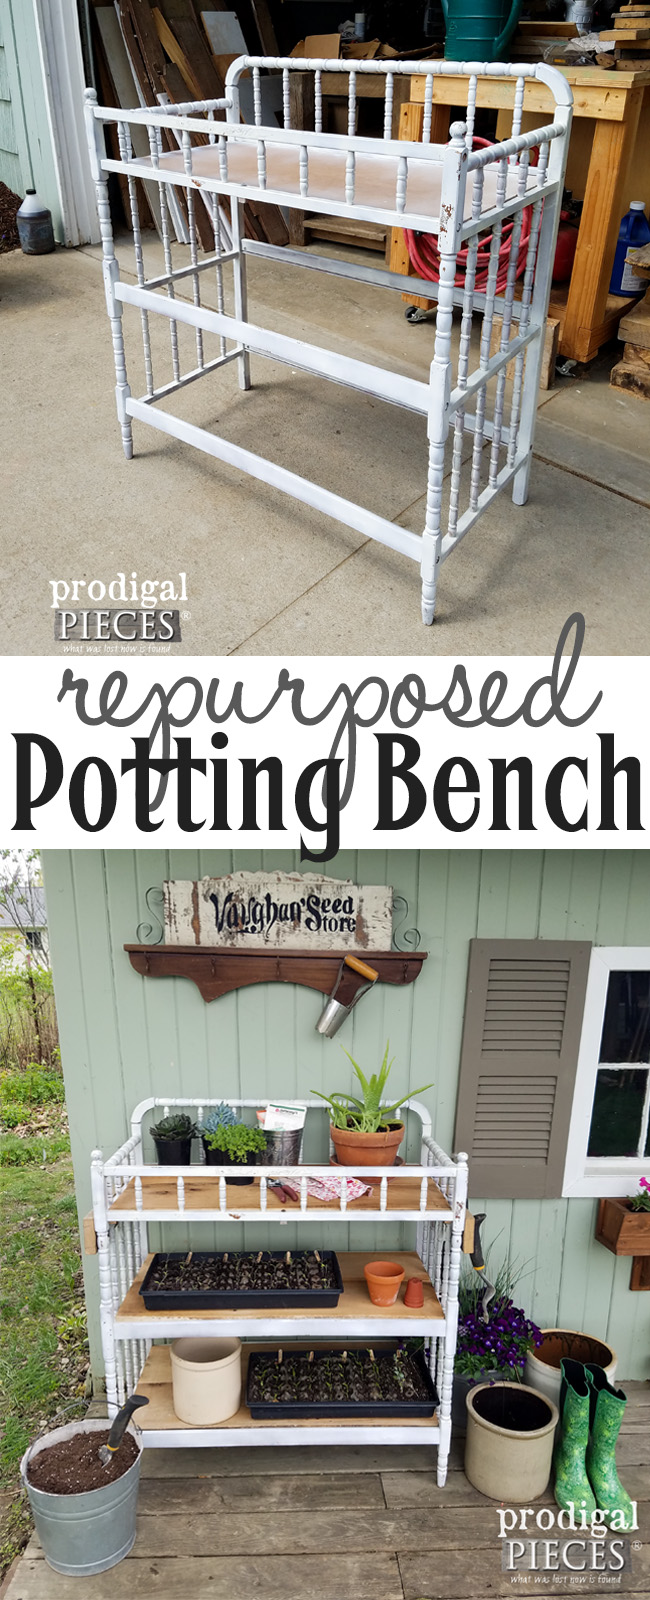 Don't toss your old changing table! Turn it into a repurposed potting bench. Details at Prodigal Pieces | prodigalpieces.com